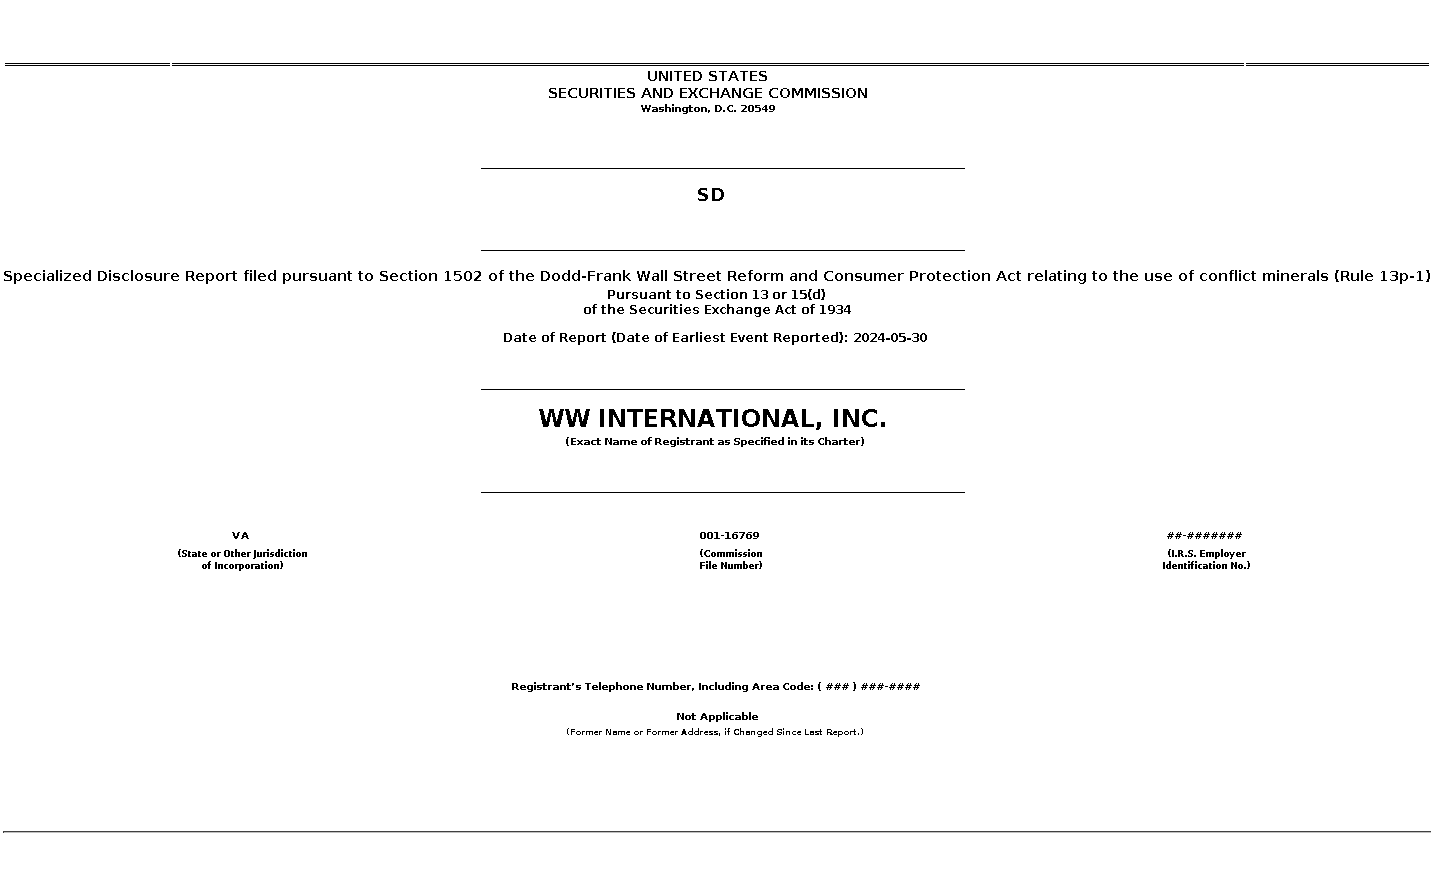 WW : SD Specialized Disclosure Report filed pursuant to Section 1502 of the Dodd-Frank Wall Street Reform and Consumer Protection Act relating to the use of conflict minerals (Rule 13p-1)